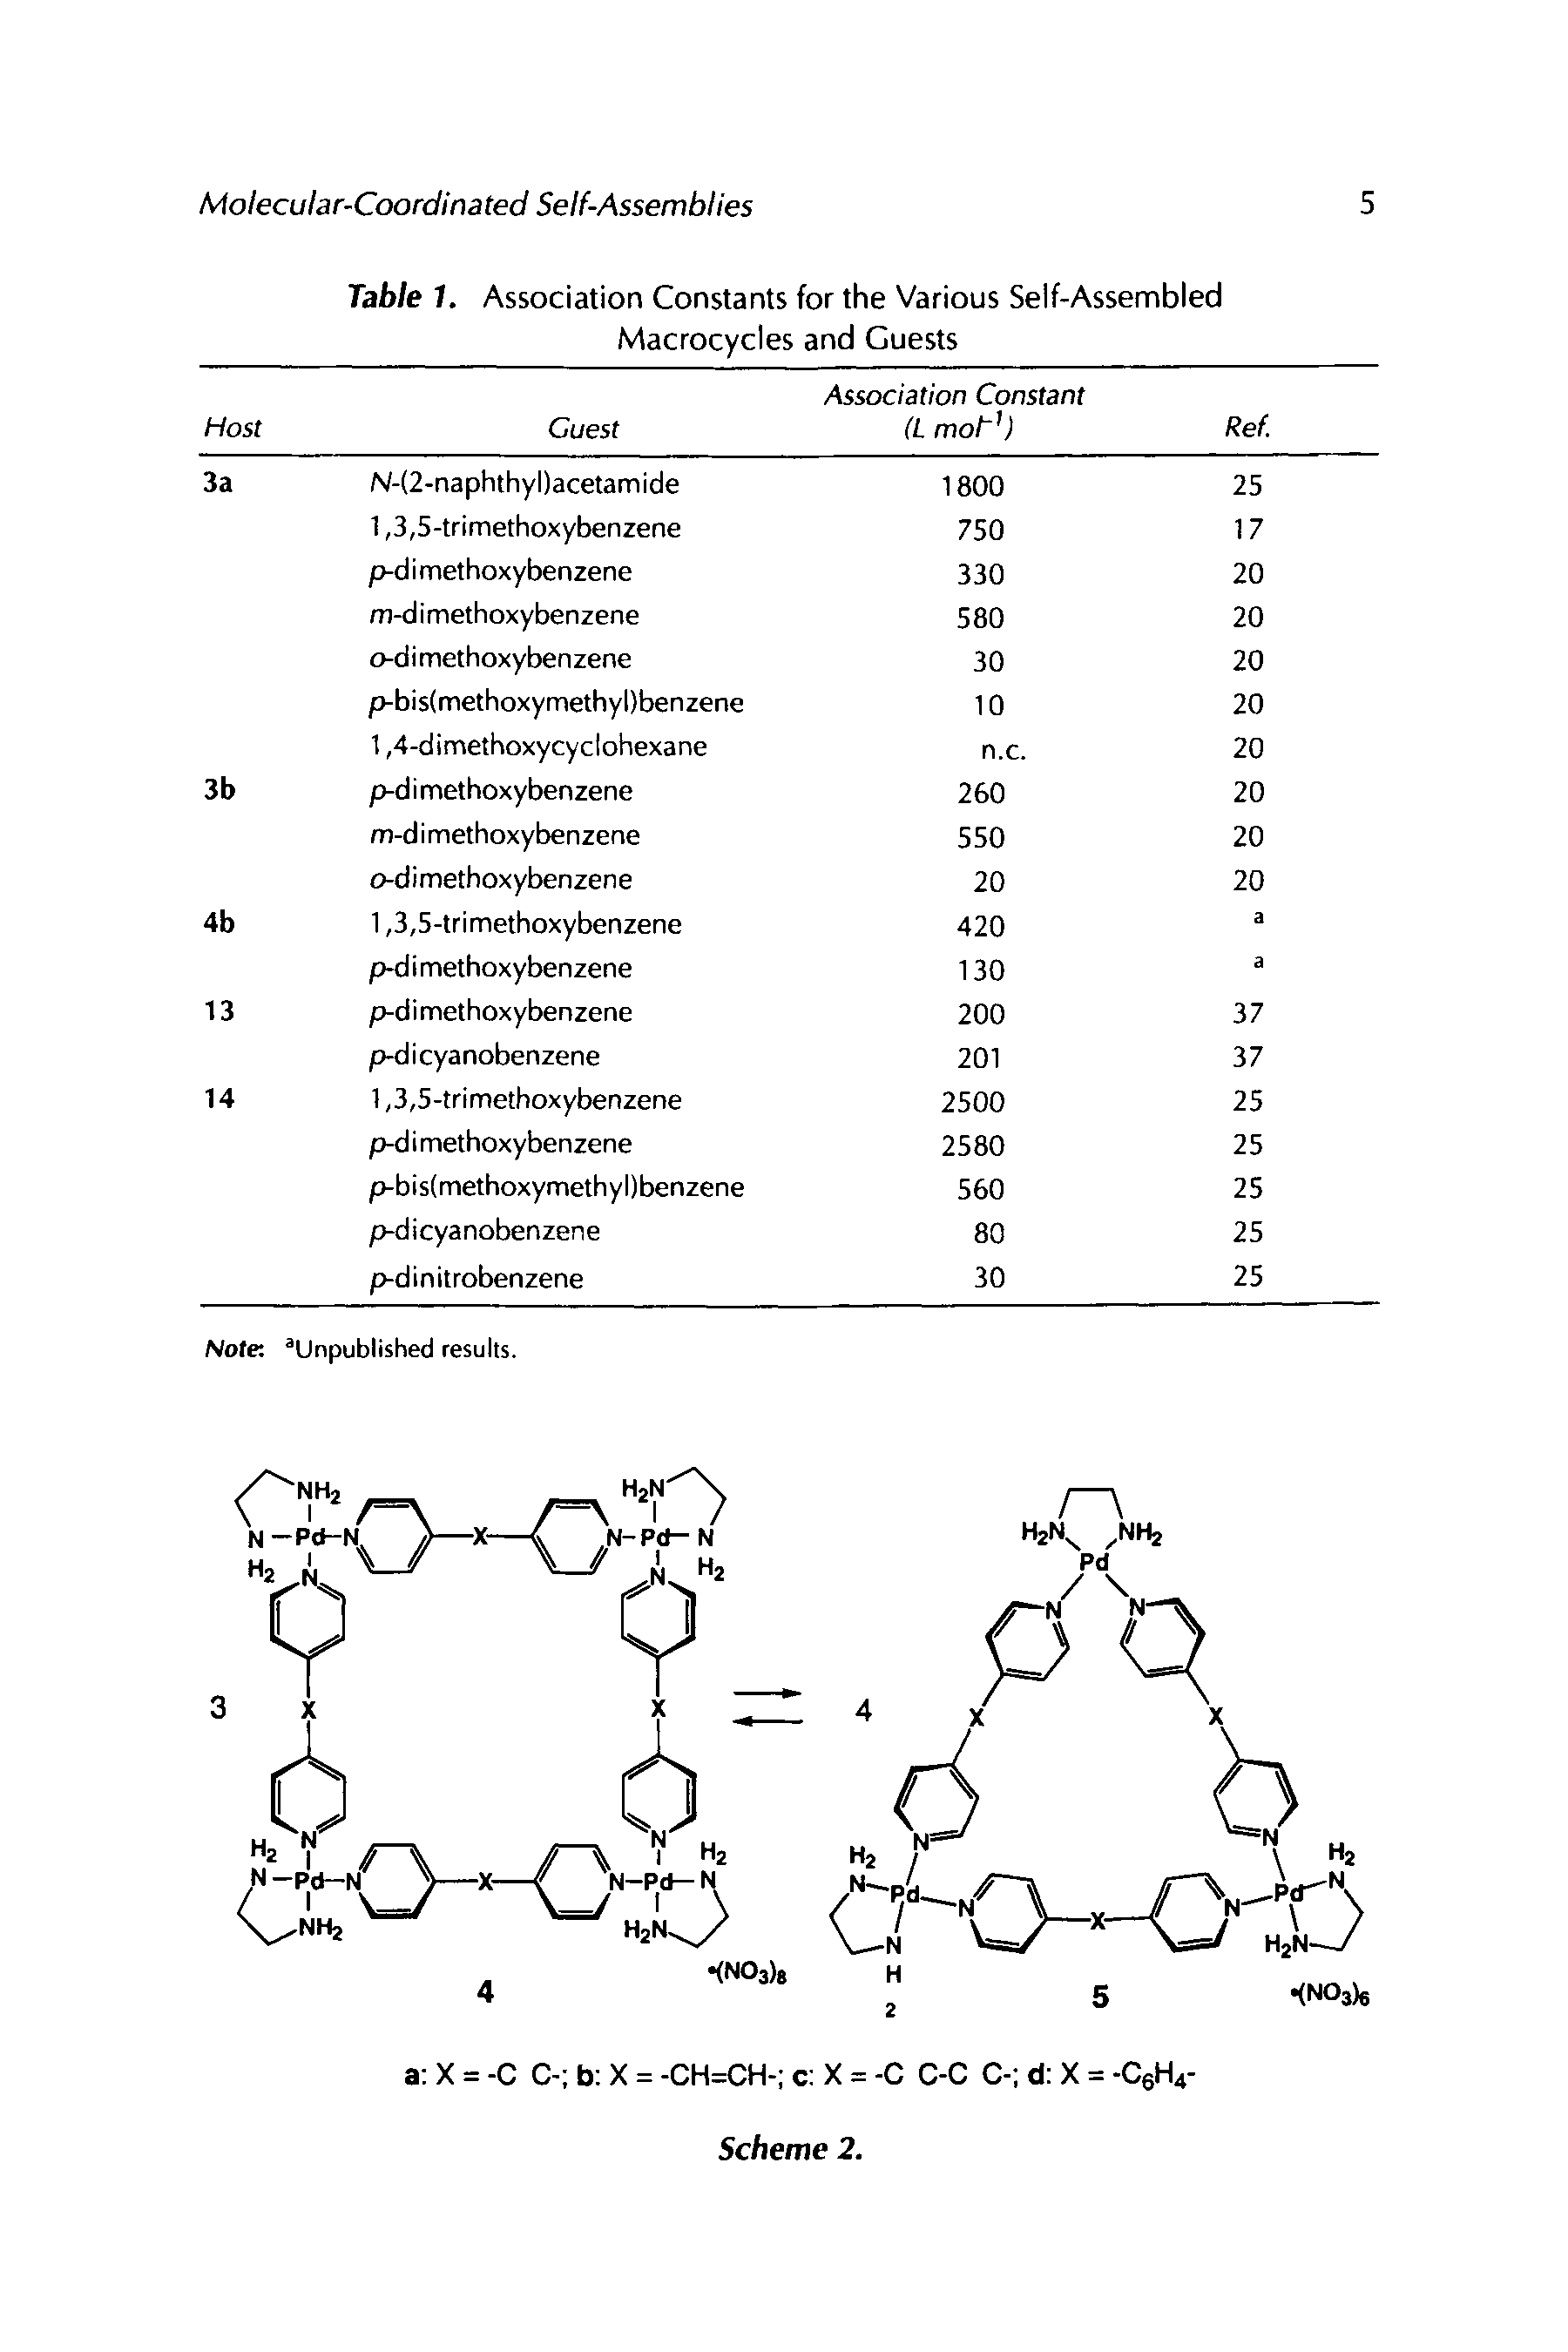 Table 1. Association Constants for the Various Self-Assembled Macrocycles and Guests...